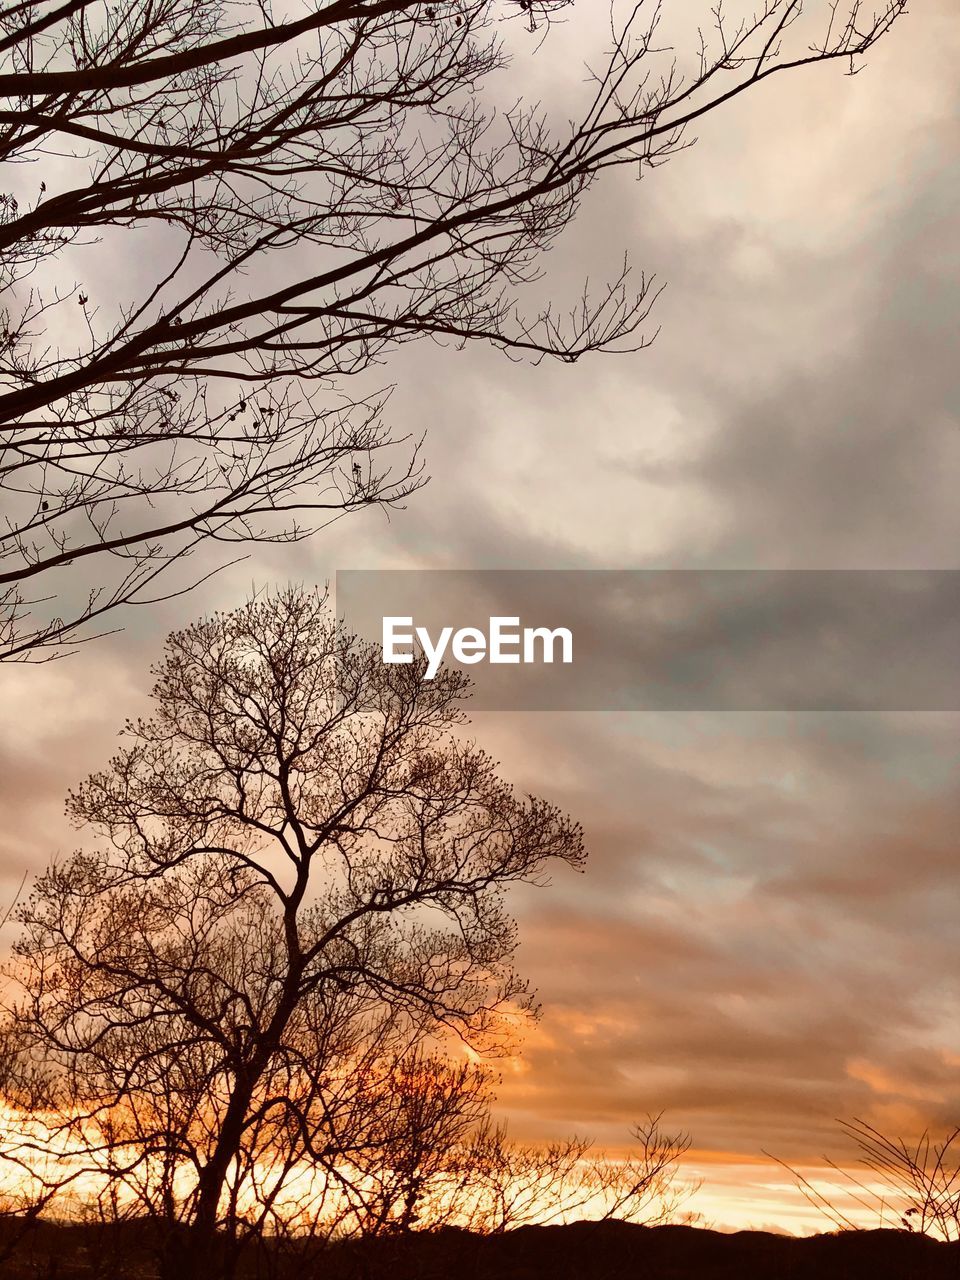 tree, sky, cloud, nature, sunset, plant, bare tree, beauty in nature, branch, silhouette, environment, landscape, scenics - nature, tranquility, no people, dramatic sky, tranquil scene, land, outdoors, evening, dawn, orange color, non-urban scene, sun, rural scene, idyllic, twilight, back lit, sunlight, moody sky, travel destinations, cloudscape, forest, tree trunk, trunk, tourism, atmospheric mood